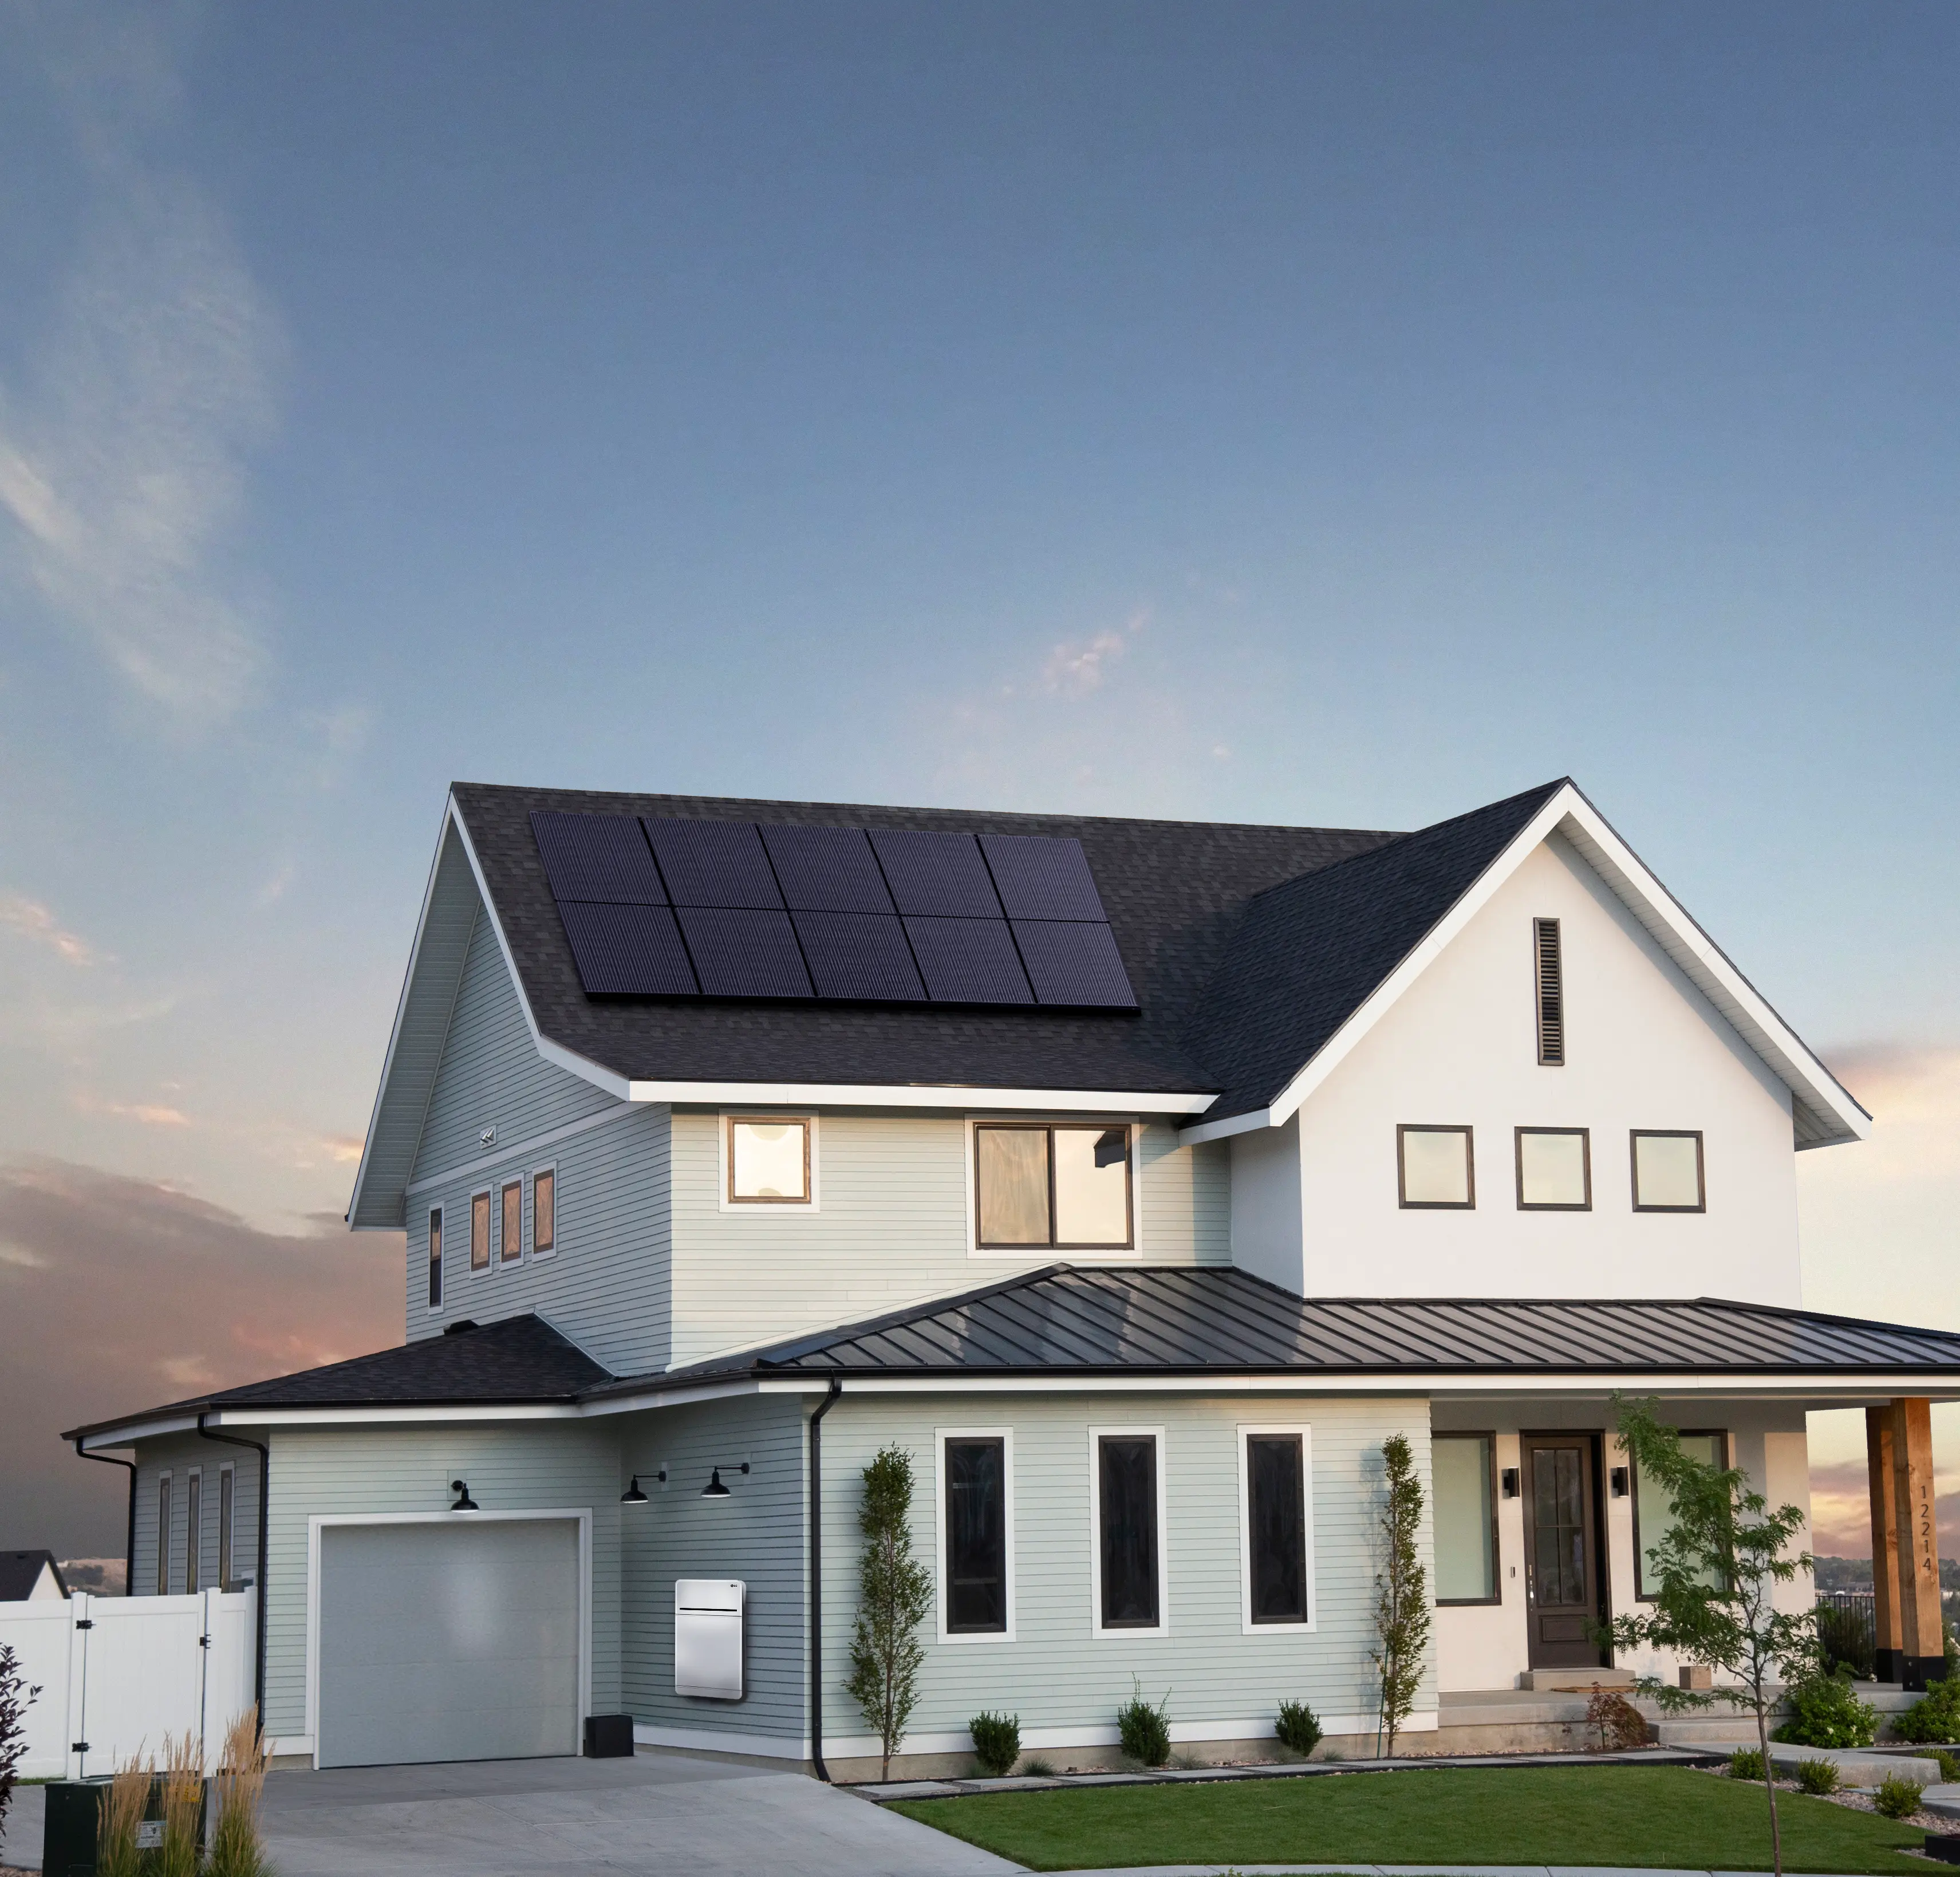 2 story house with solar panels on the roof at sunset